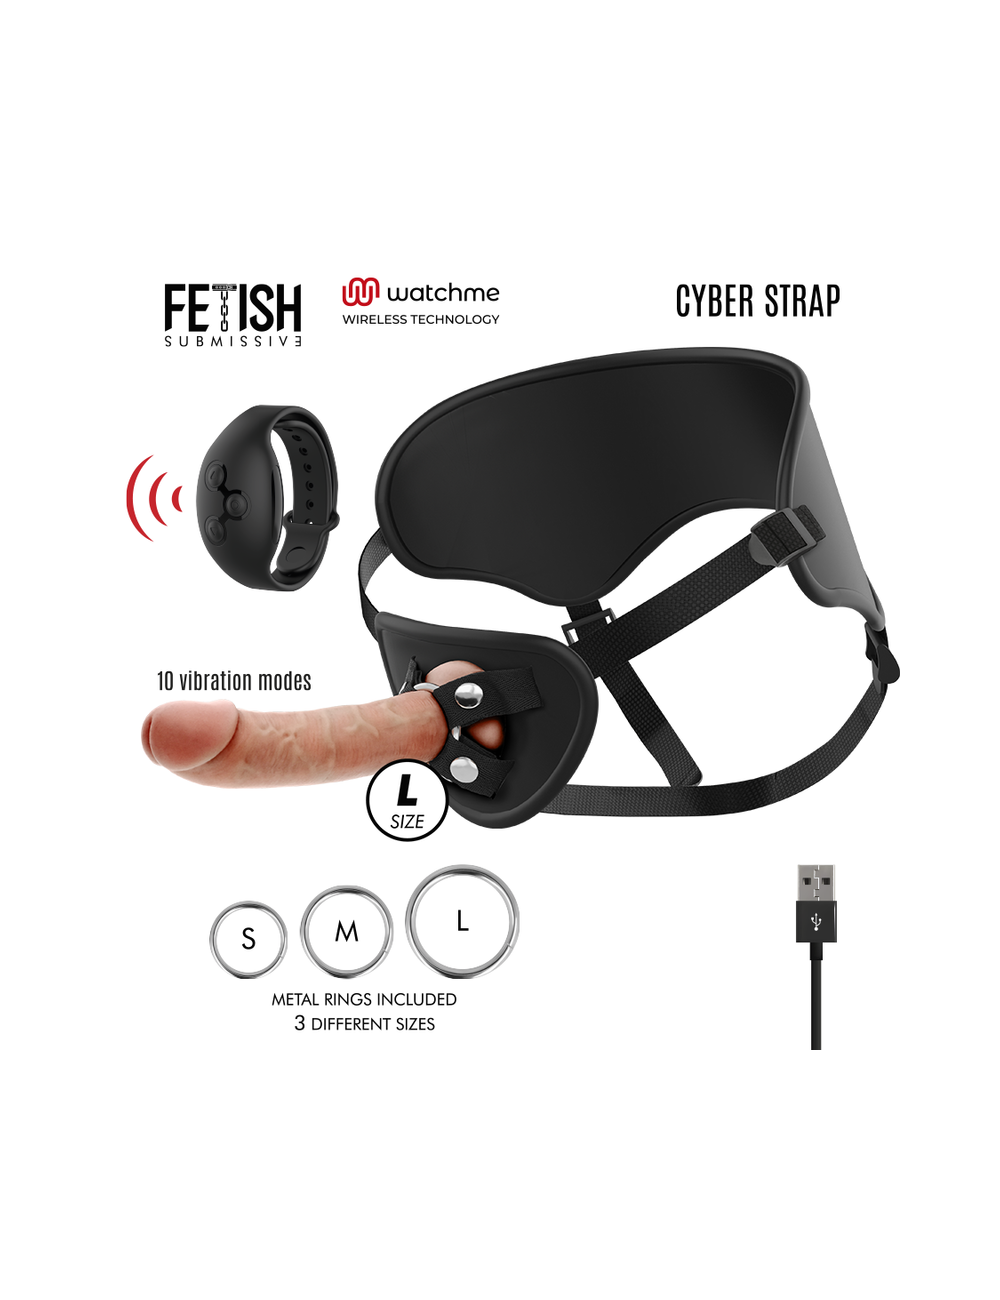 Sextoys - Accessoires - CYBER STRAP REMOTE CONTROL HARNESS WATCME TECHNOLOGY L - FETISH SUBMISSIVE CYBER STRAP